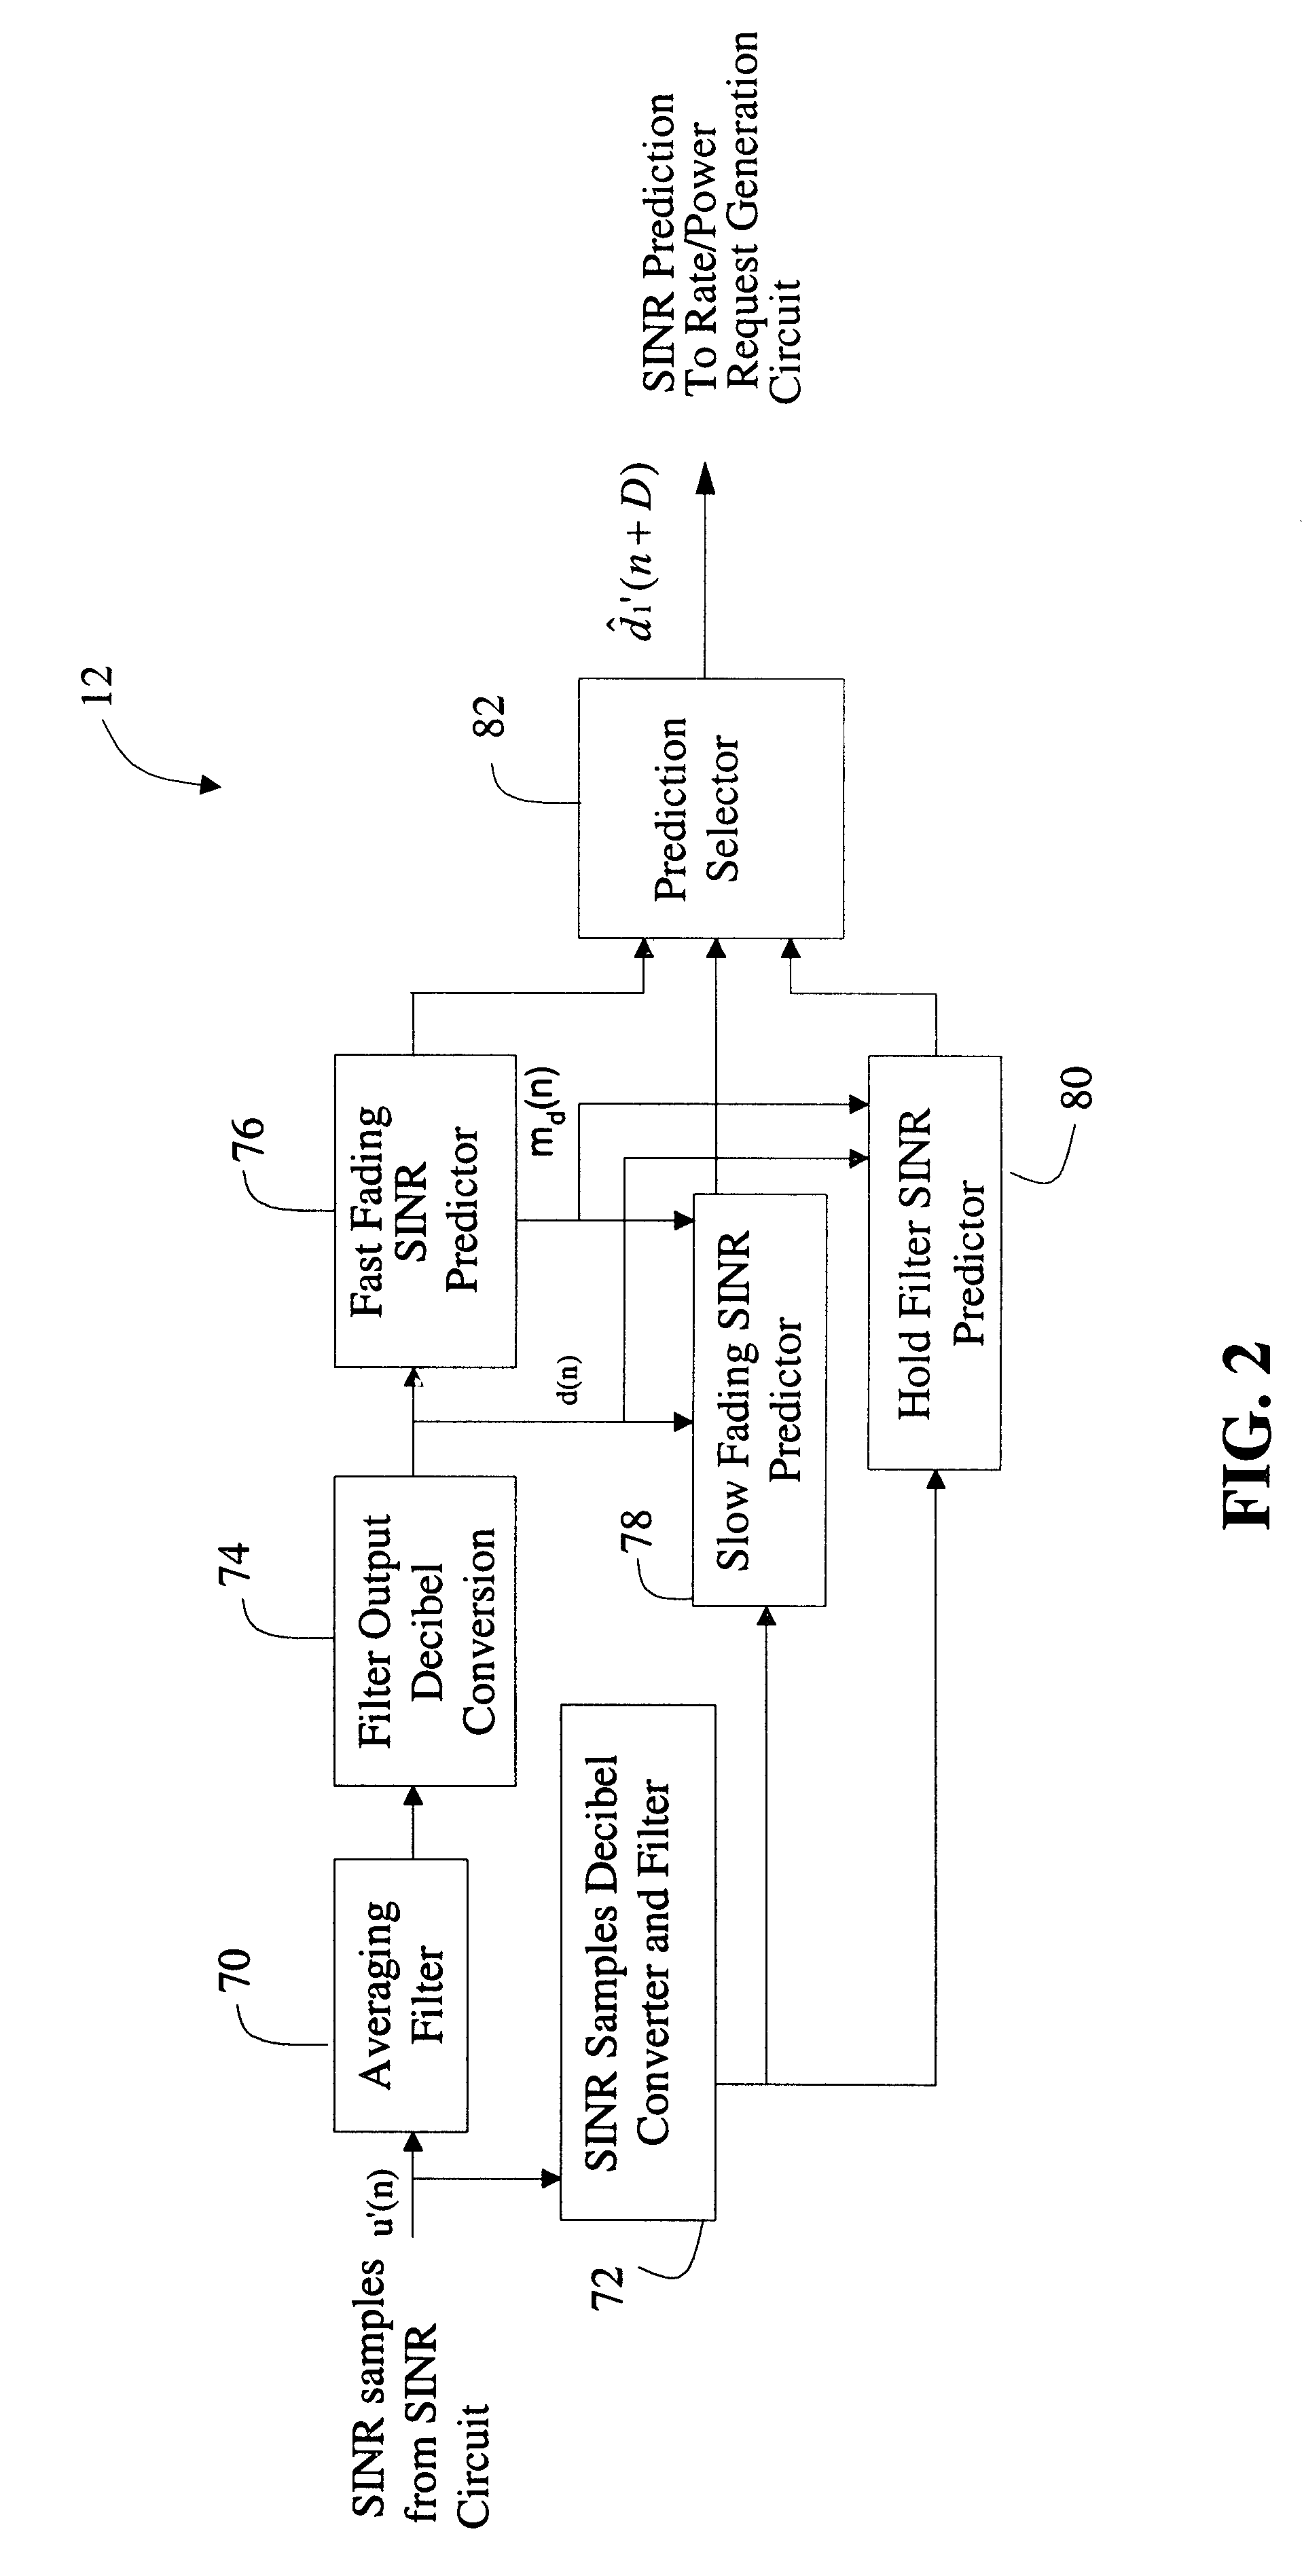 System and method for accurately predicting signal to interference and noise ratio to improve communications system performance